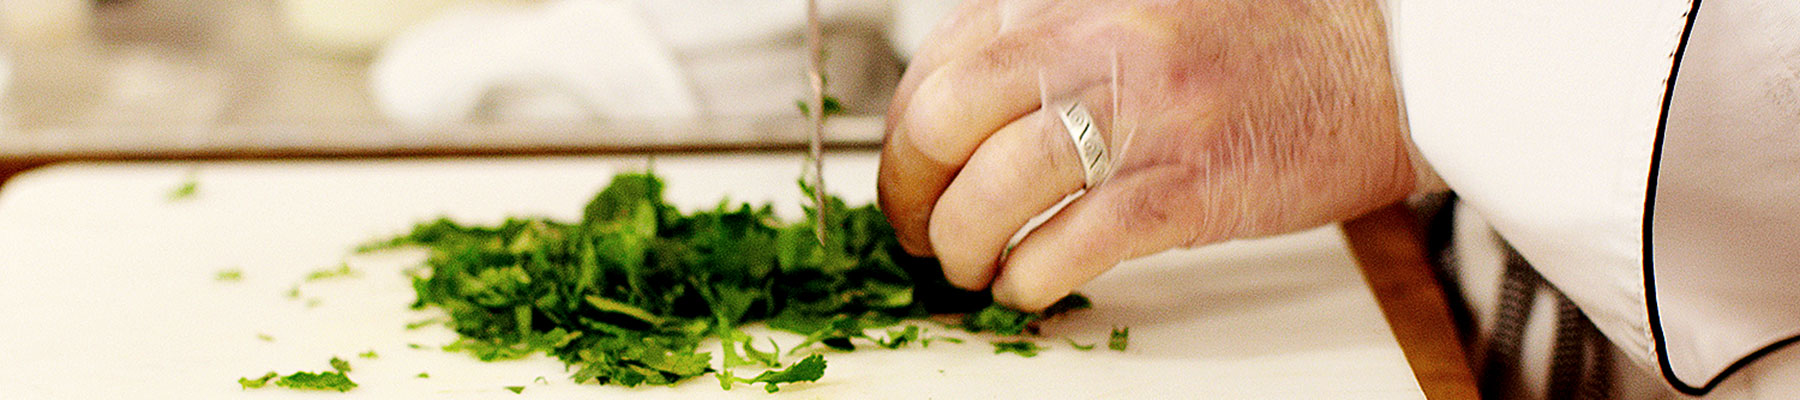 close up of hands chopping herbs